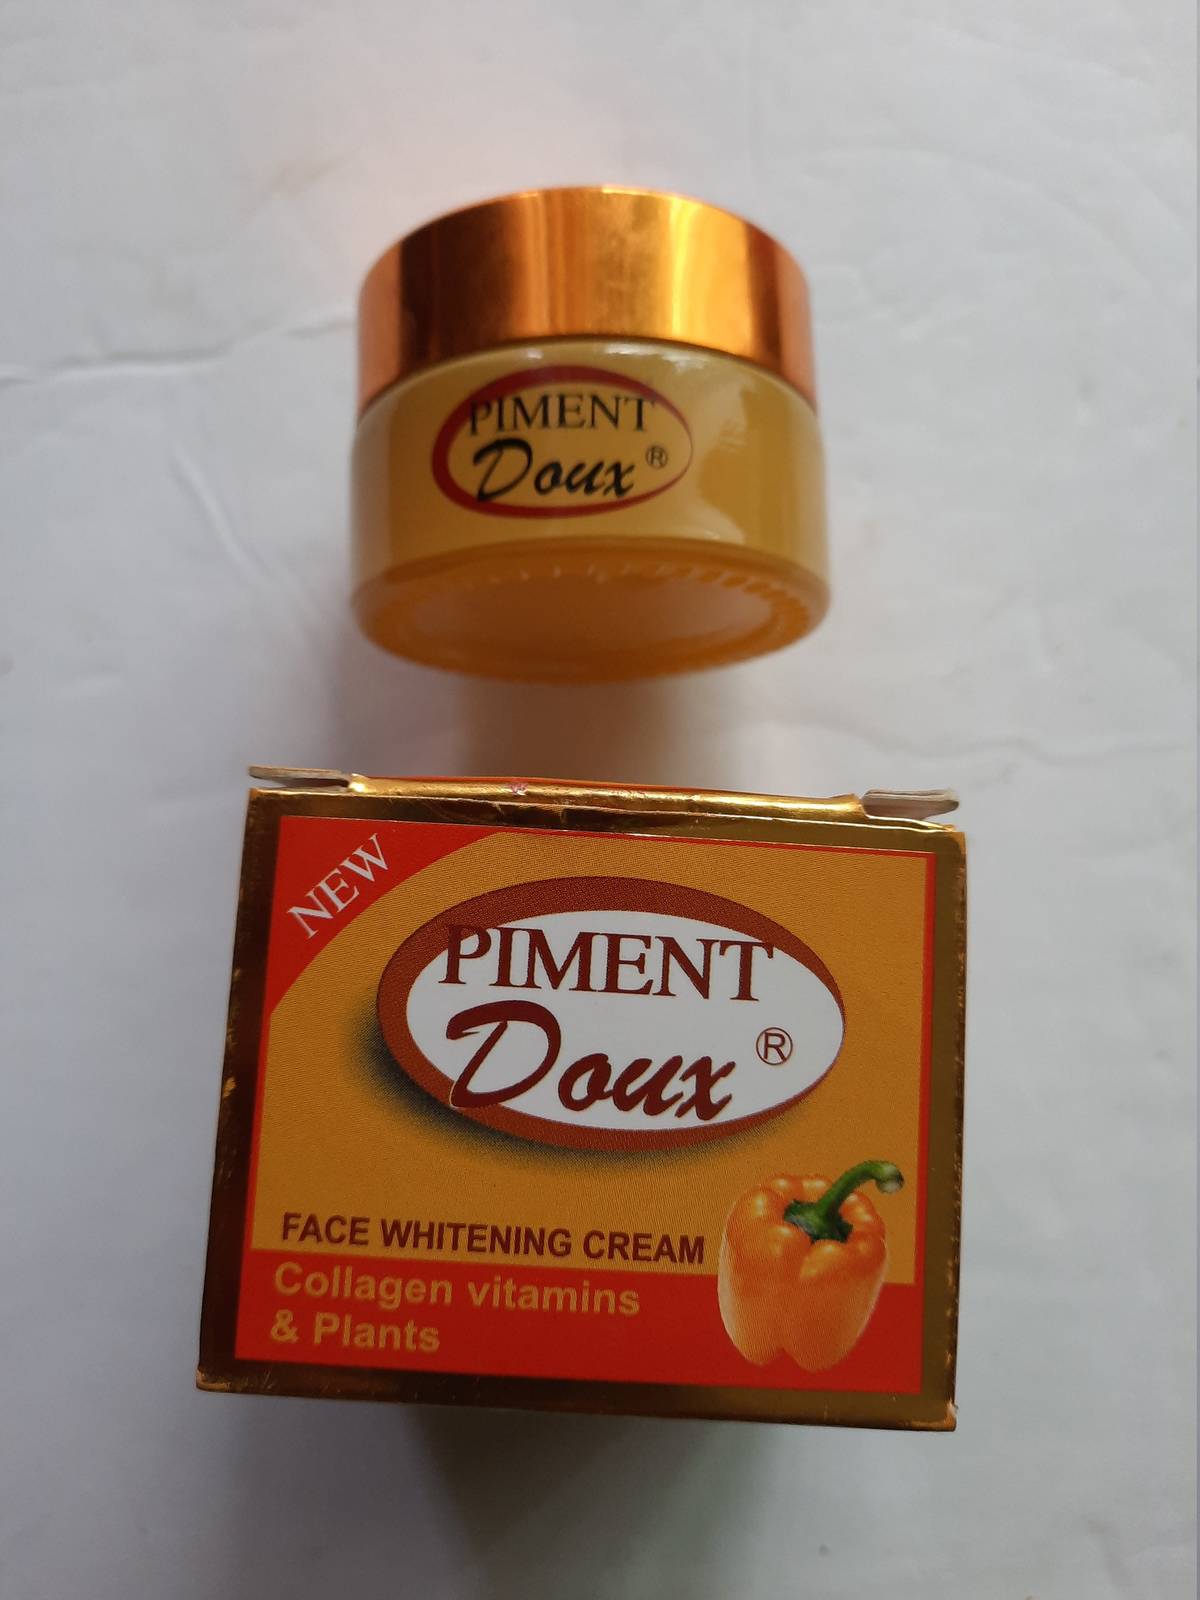 Piment doux face whitening/anti stains face cream with collagen